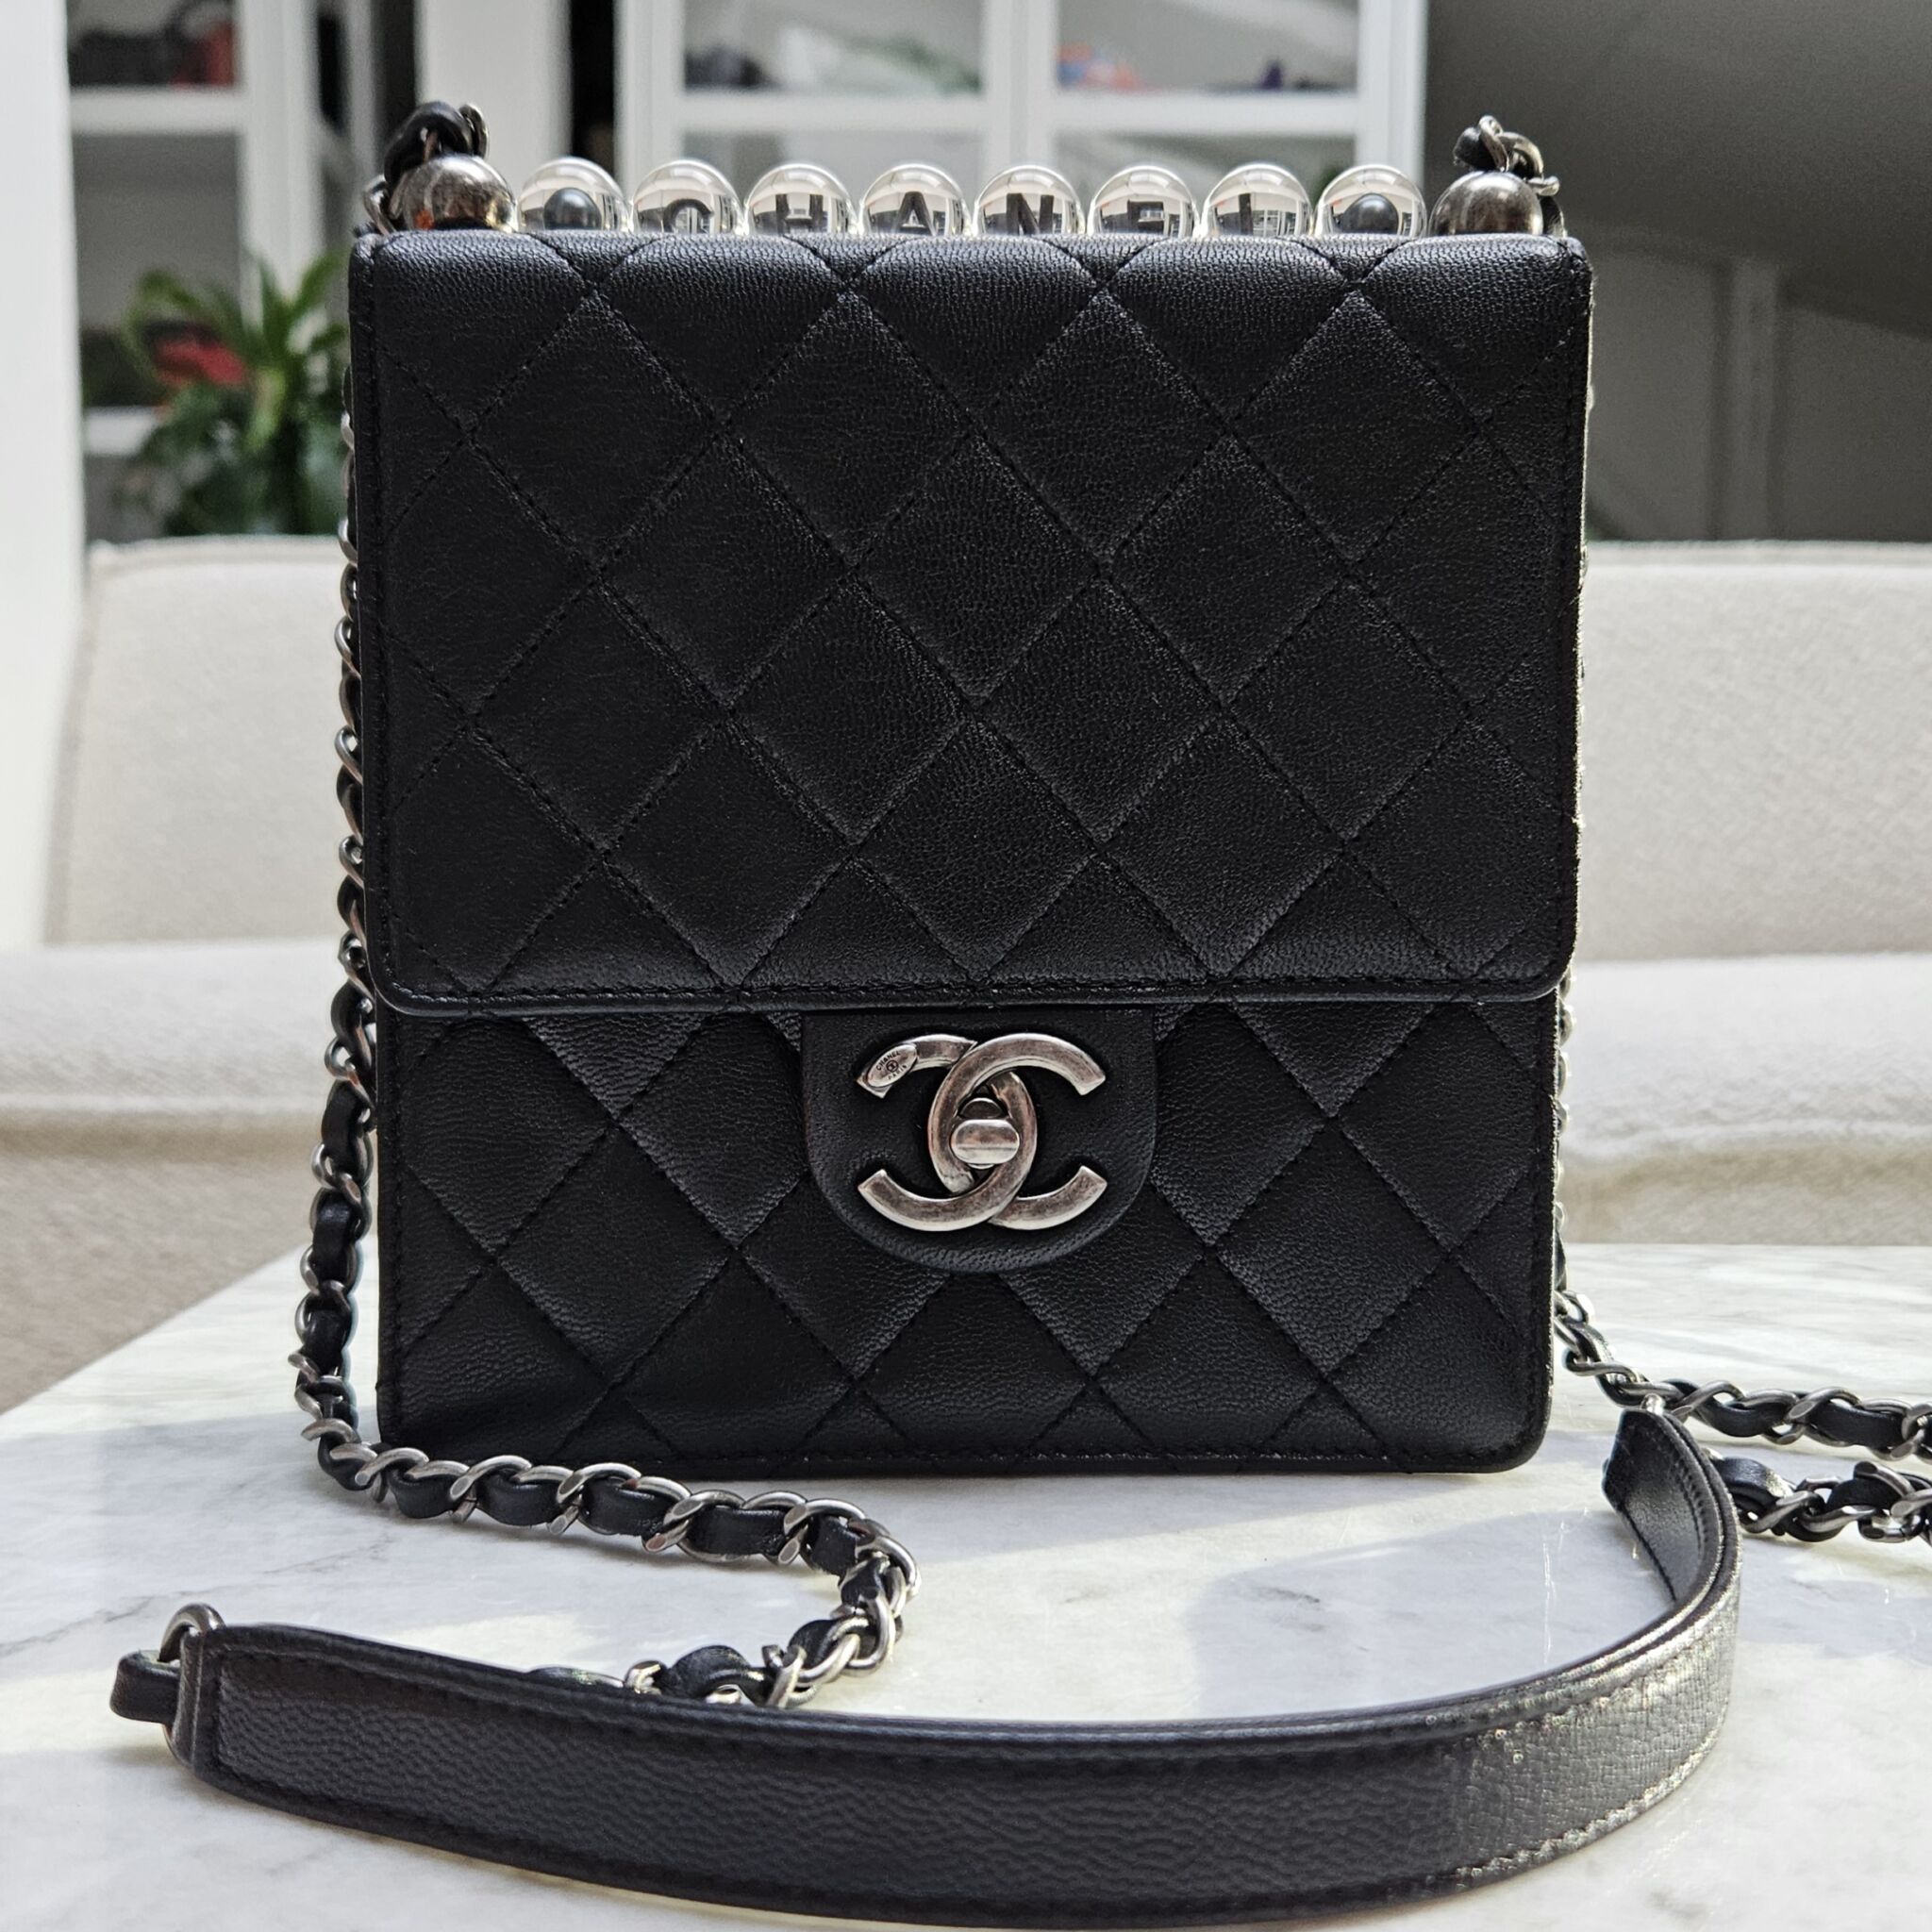 Top 7 Most Affordable Chanel Bags, myGemma